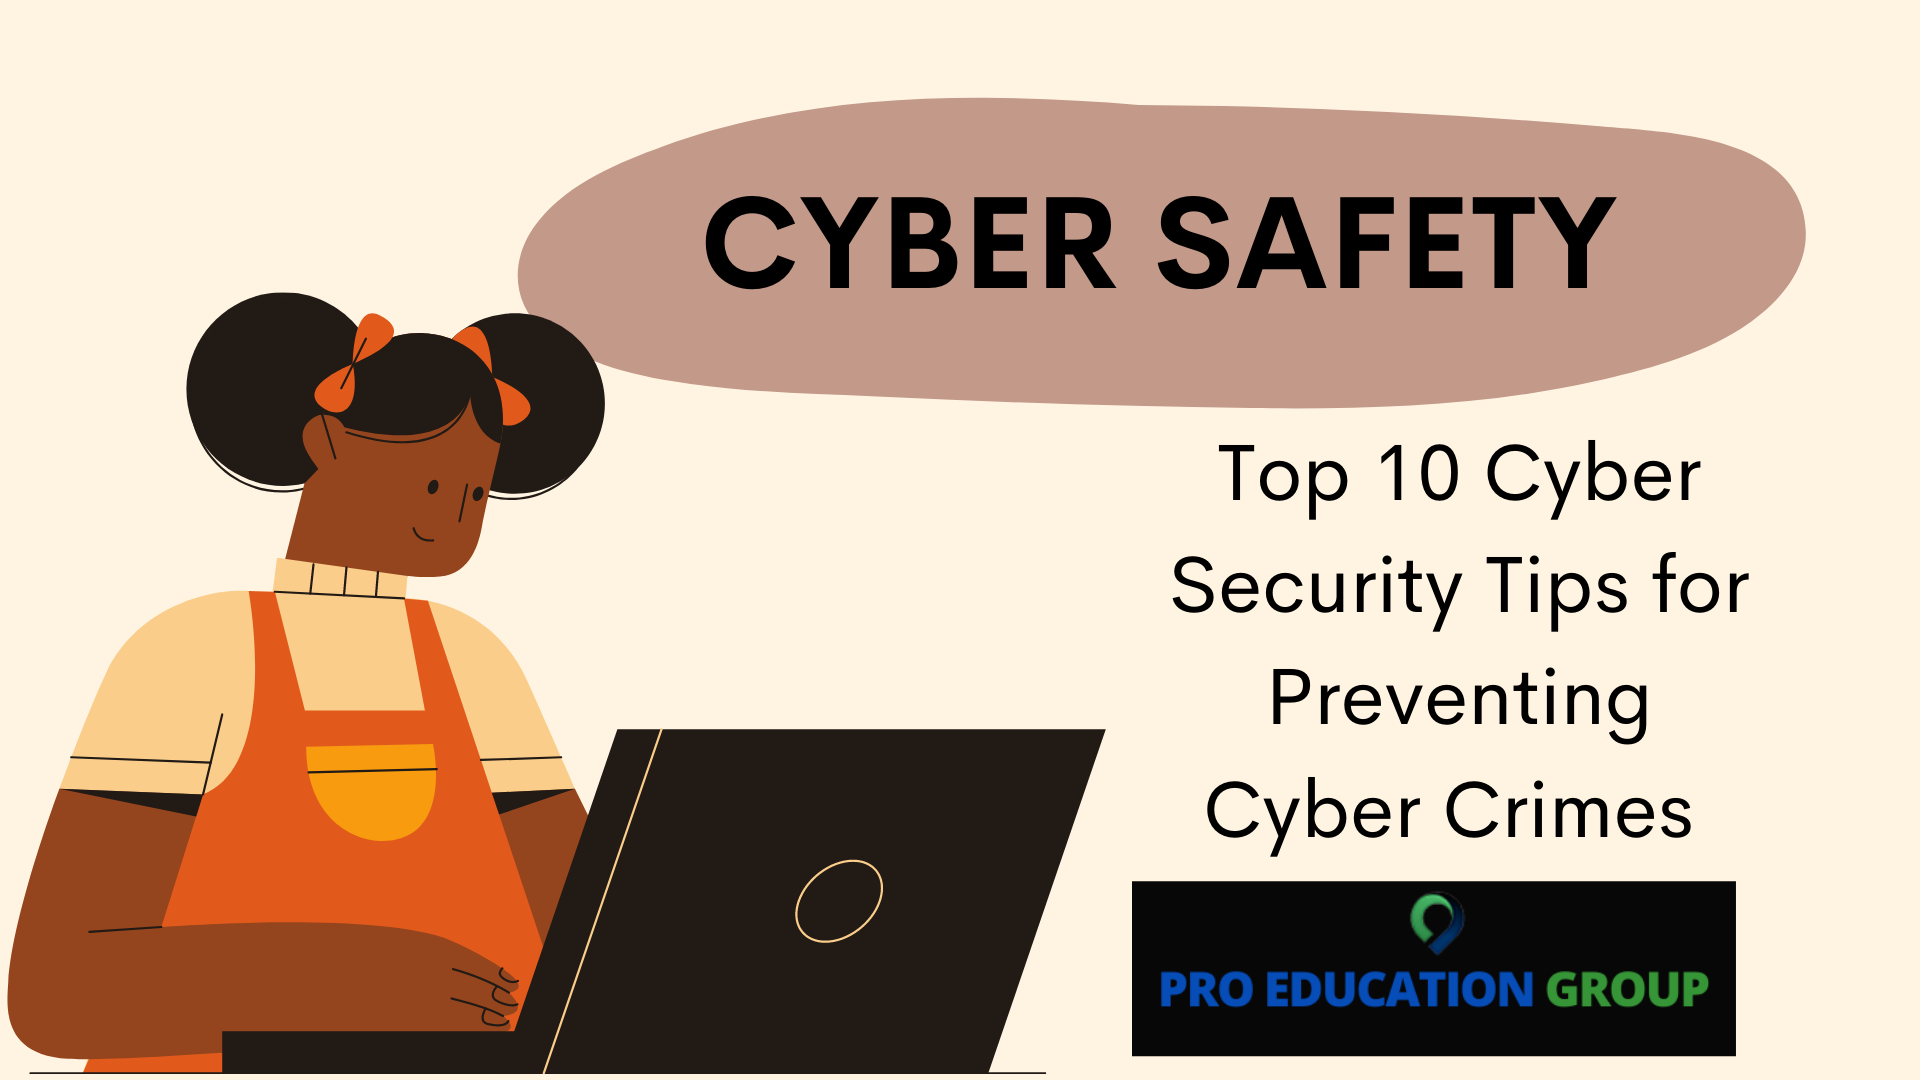 Top 10 Cyber Security Tips for Preventing  Cyber Crimes